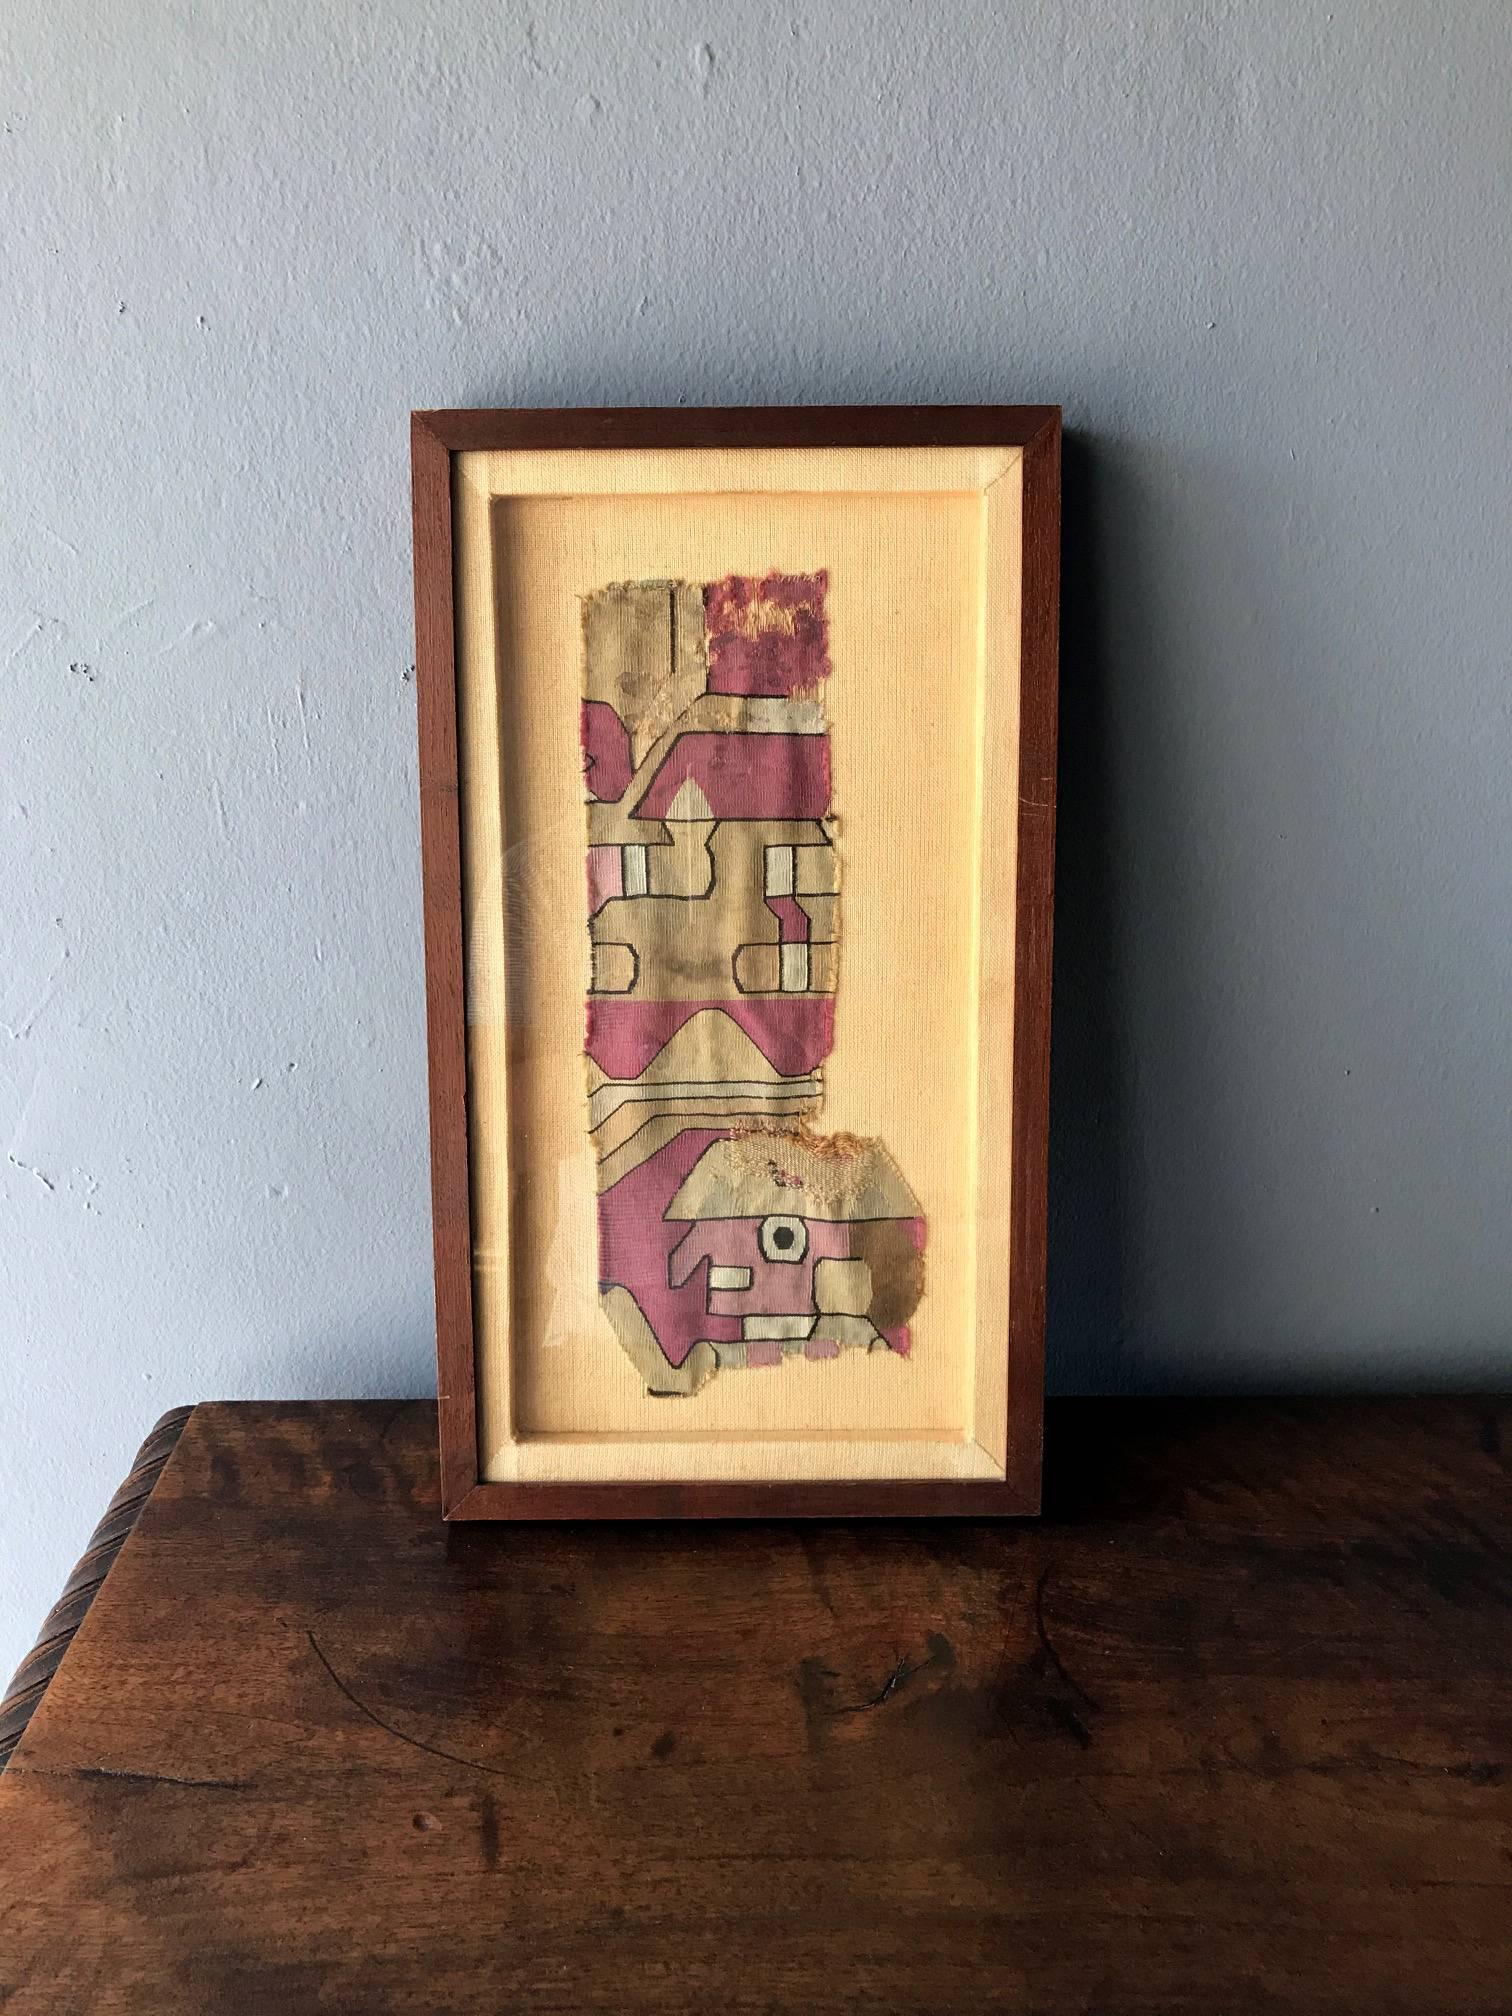 A nicely framed fragment of antique Pre-Columbian textile that depicts a stylized figure in a geometrical background. Linen backing. The original is likely from Inca empire and nowadays Peru.